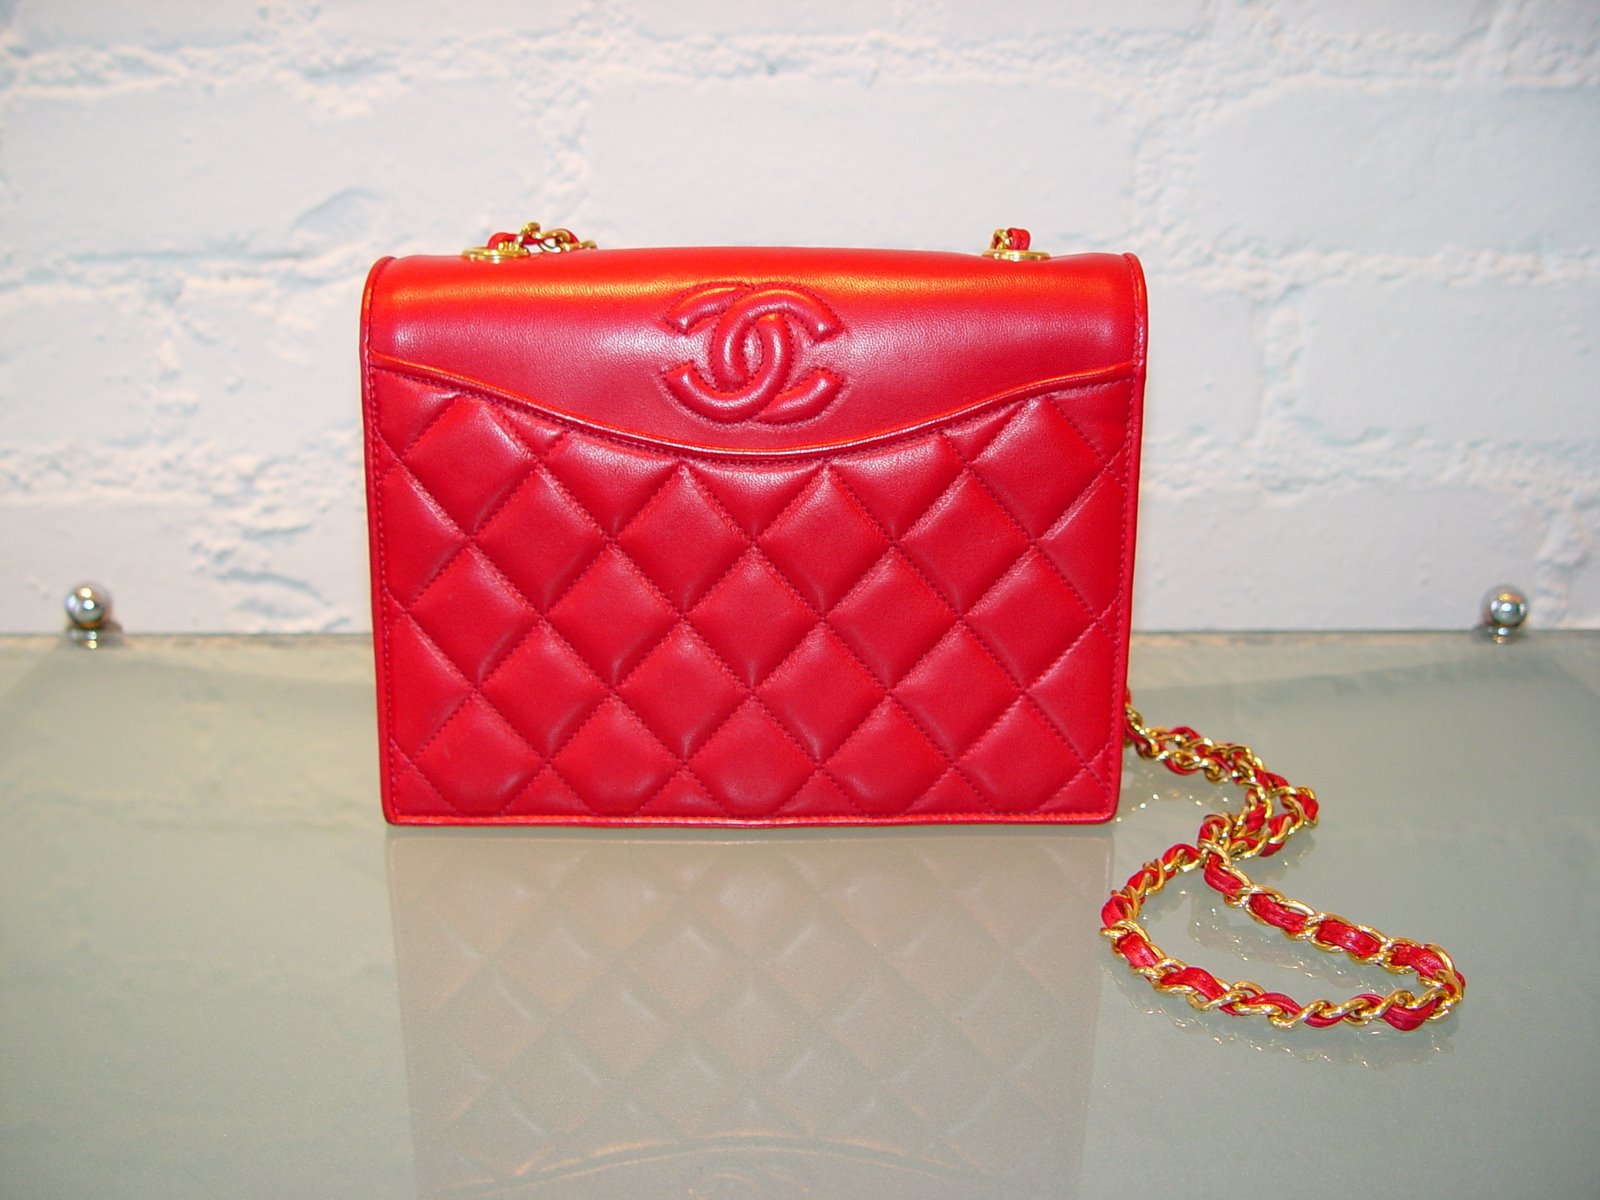 [CHANEL+RED+QUIILTED+LEATHER+BAG+8+BY+6+C+LATE+80S.JPG.JPG]